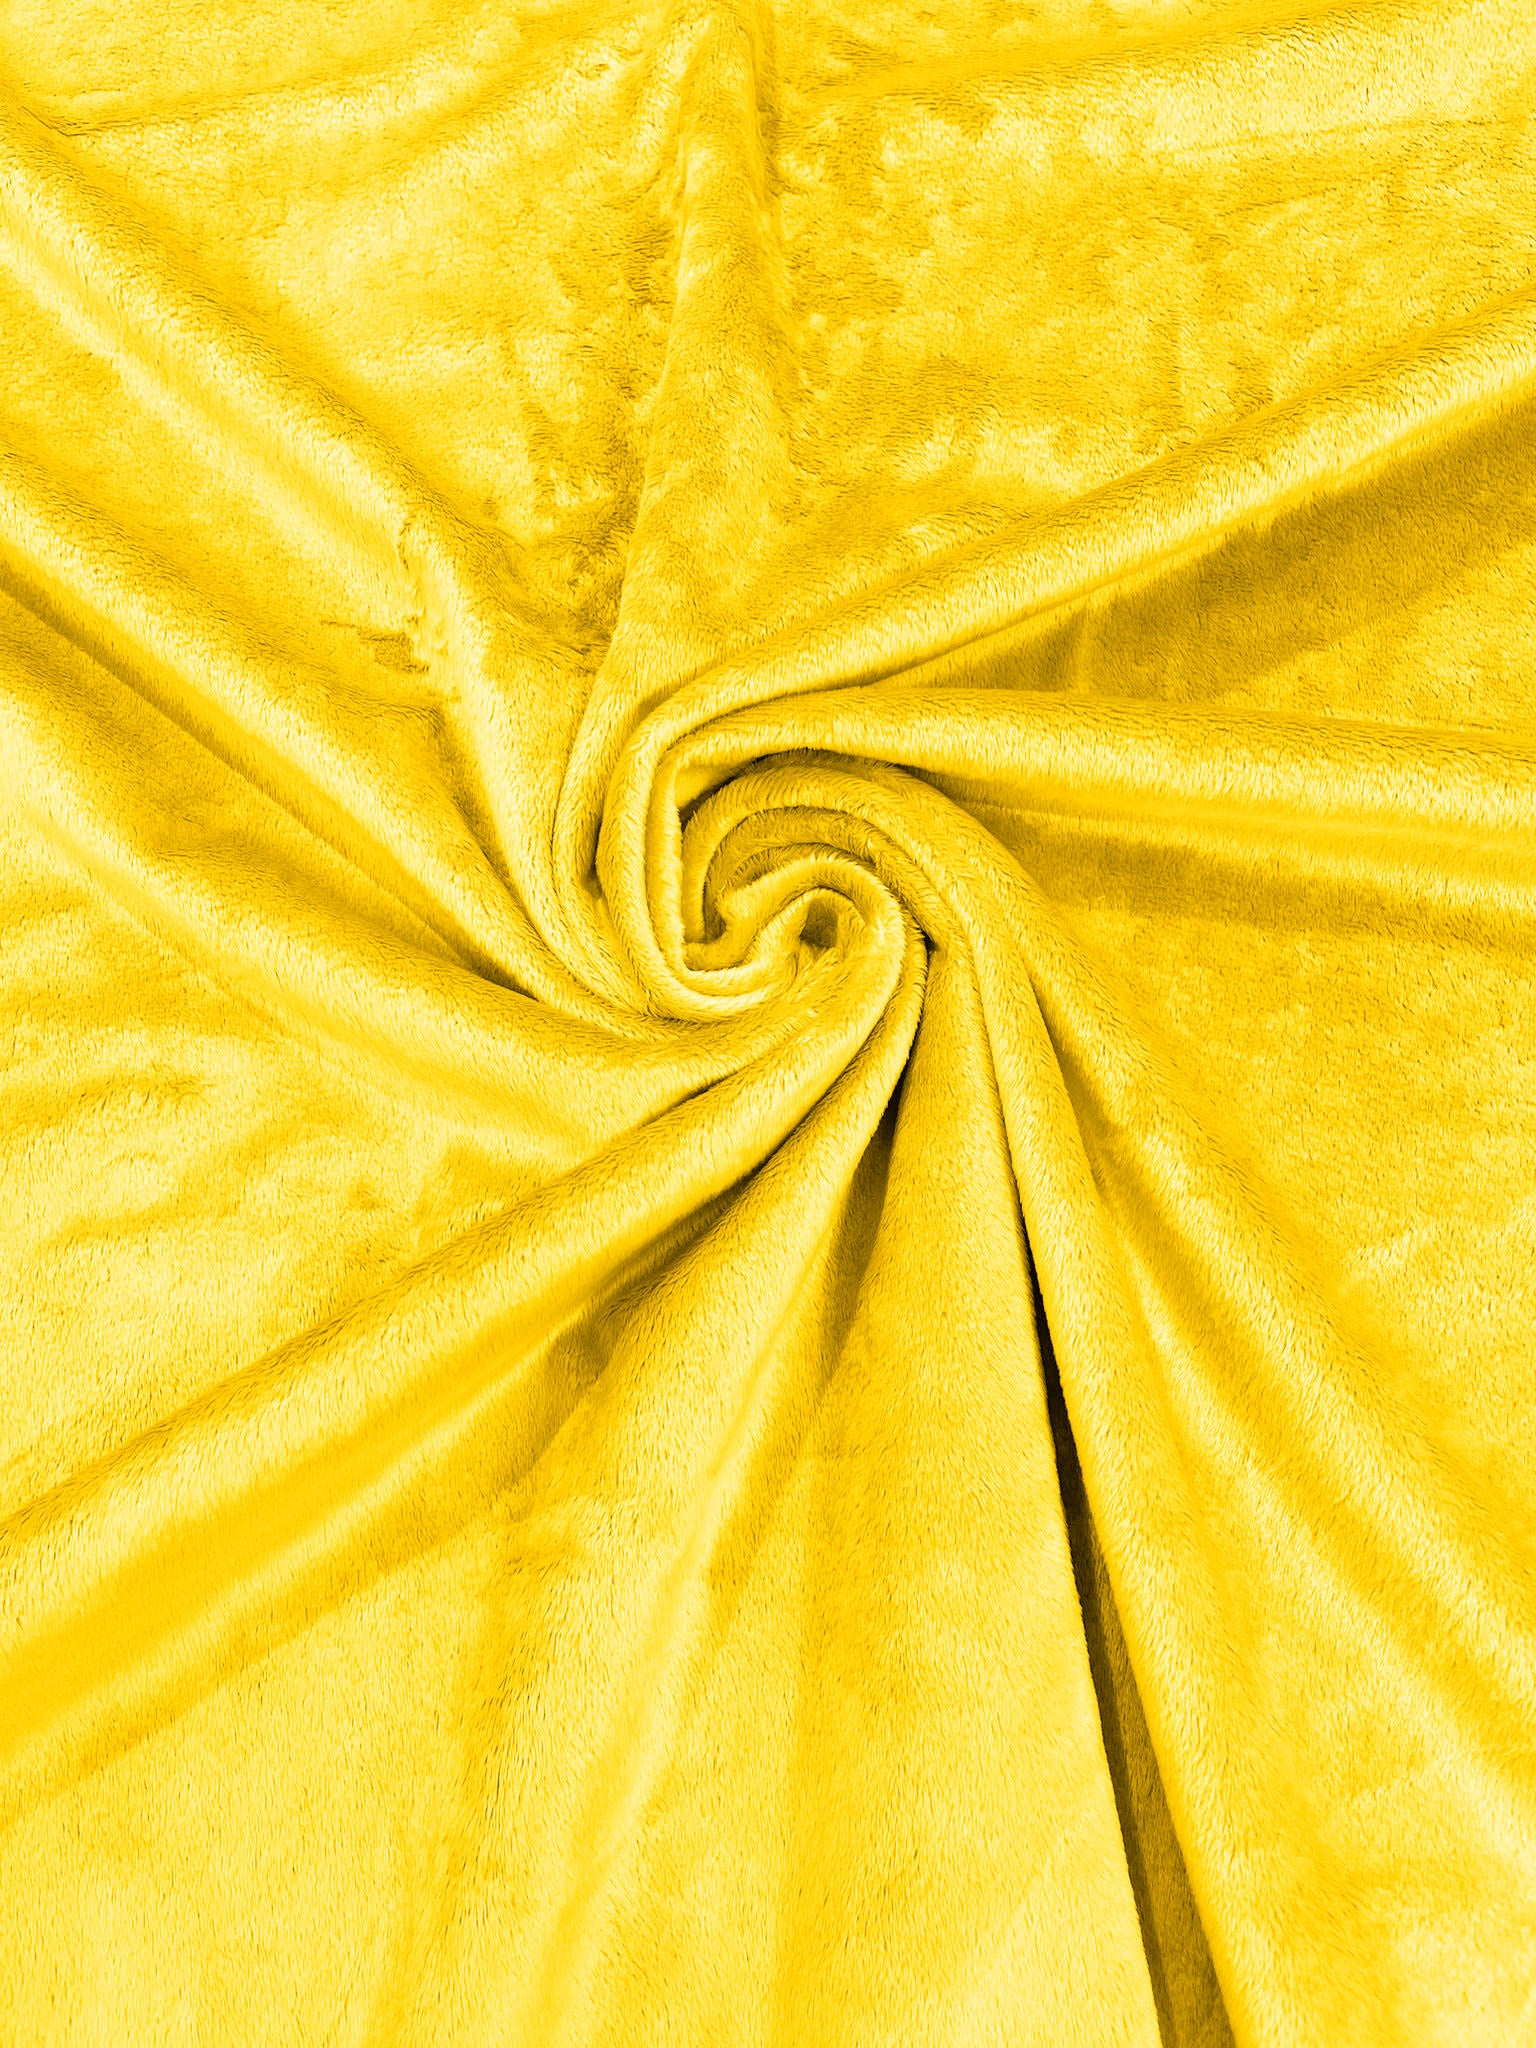 Yellow Minky Smooth Soft Solid Plush Faux Fake Fur Fabric Polyester- Sold by the yard.